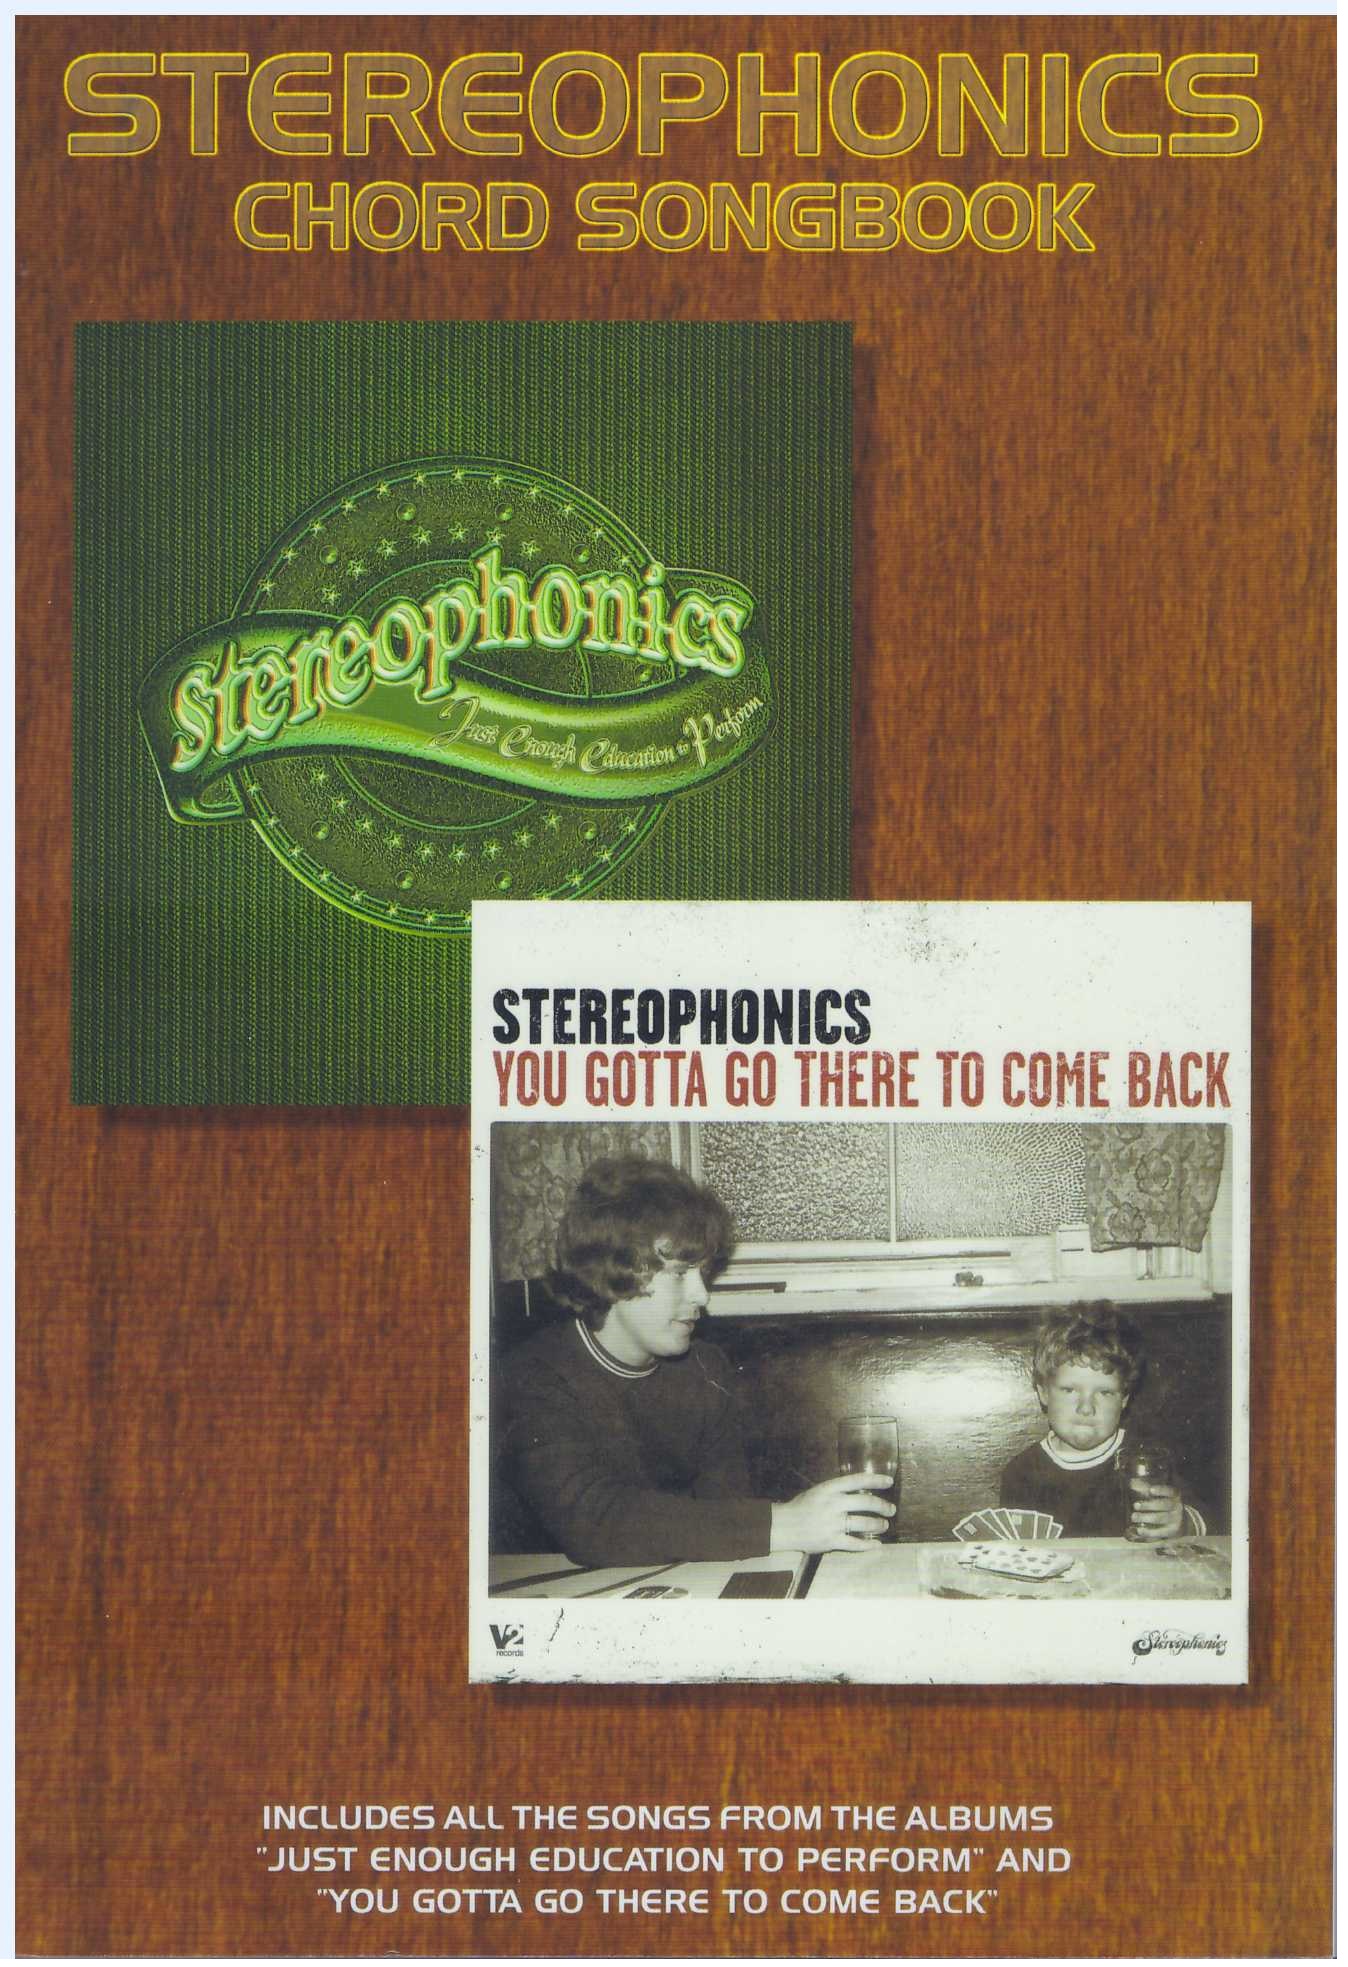 Stereophonics Chord Songbook / Vocal Book / Voice Book / Guitar Book / Gitar Book